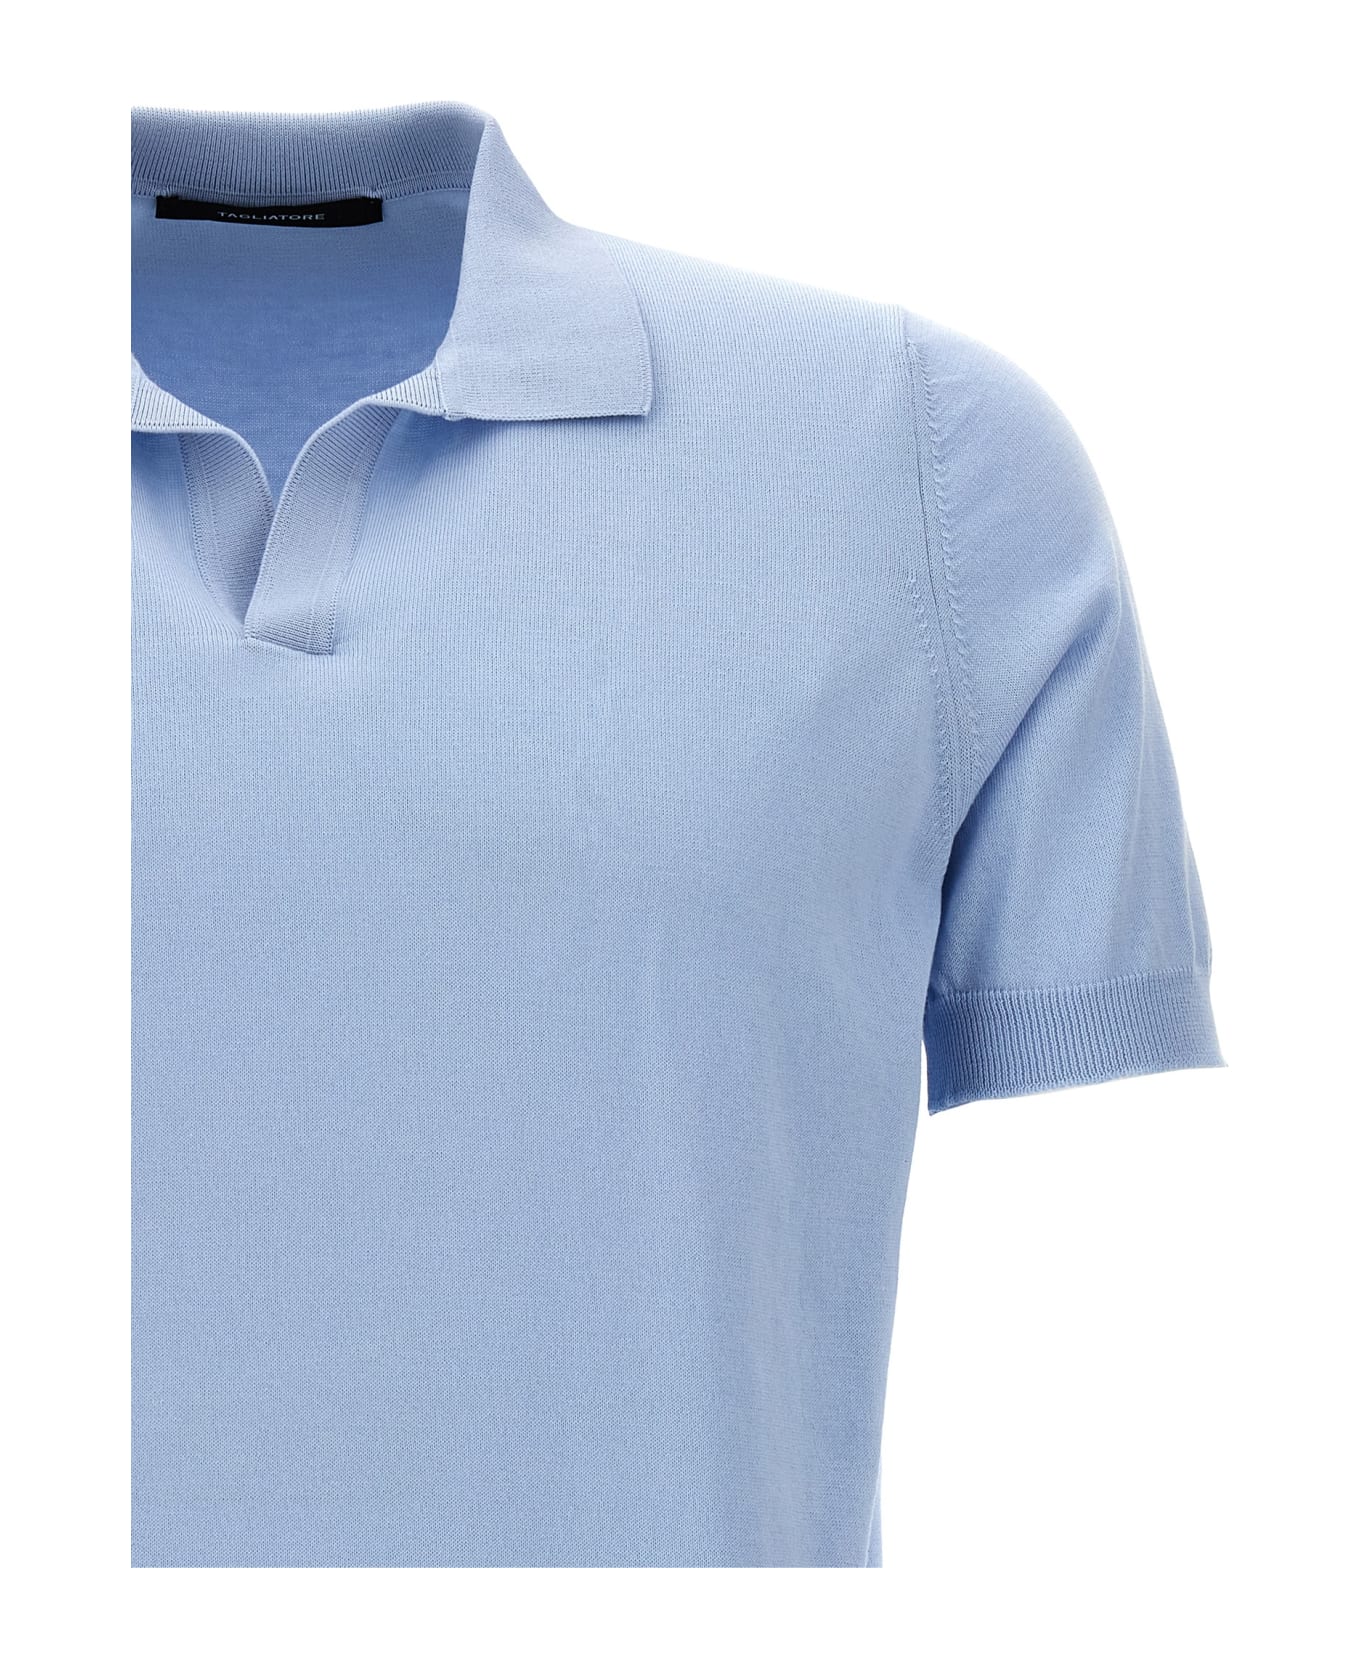 Tagliatore Knitted Polo Shirt - Light Blue ポロシャツ